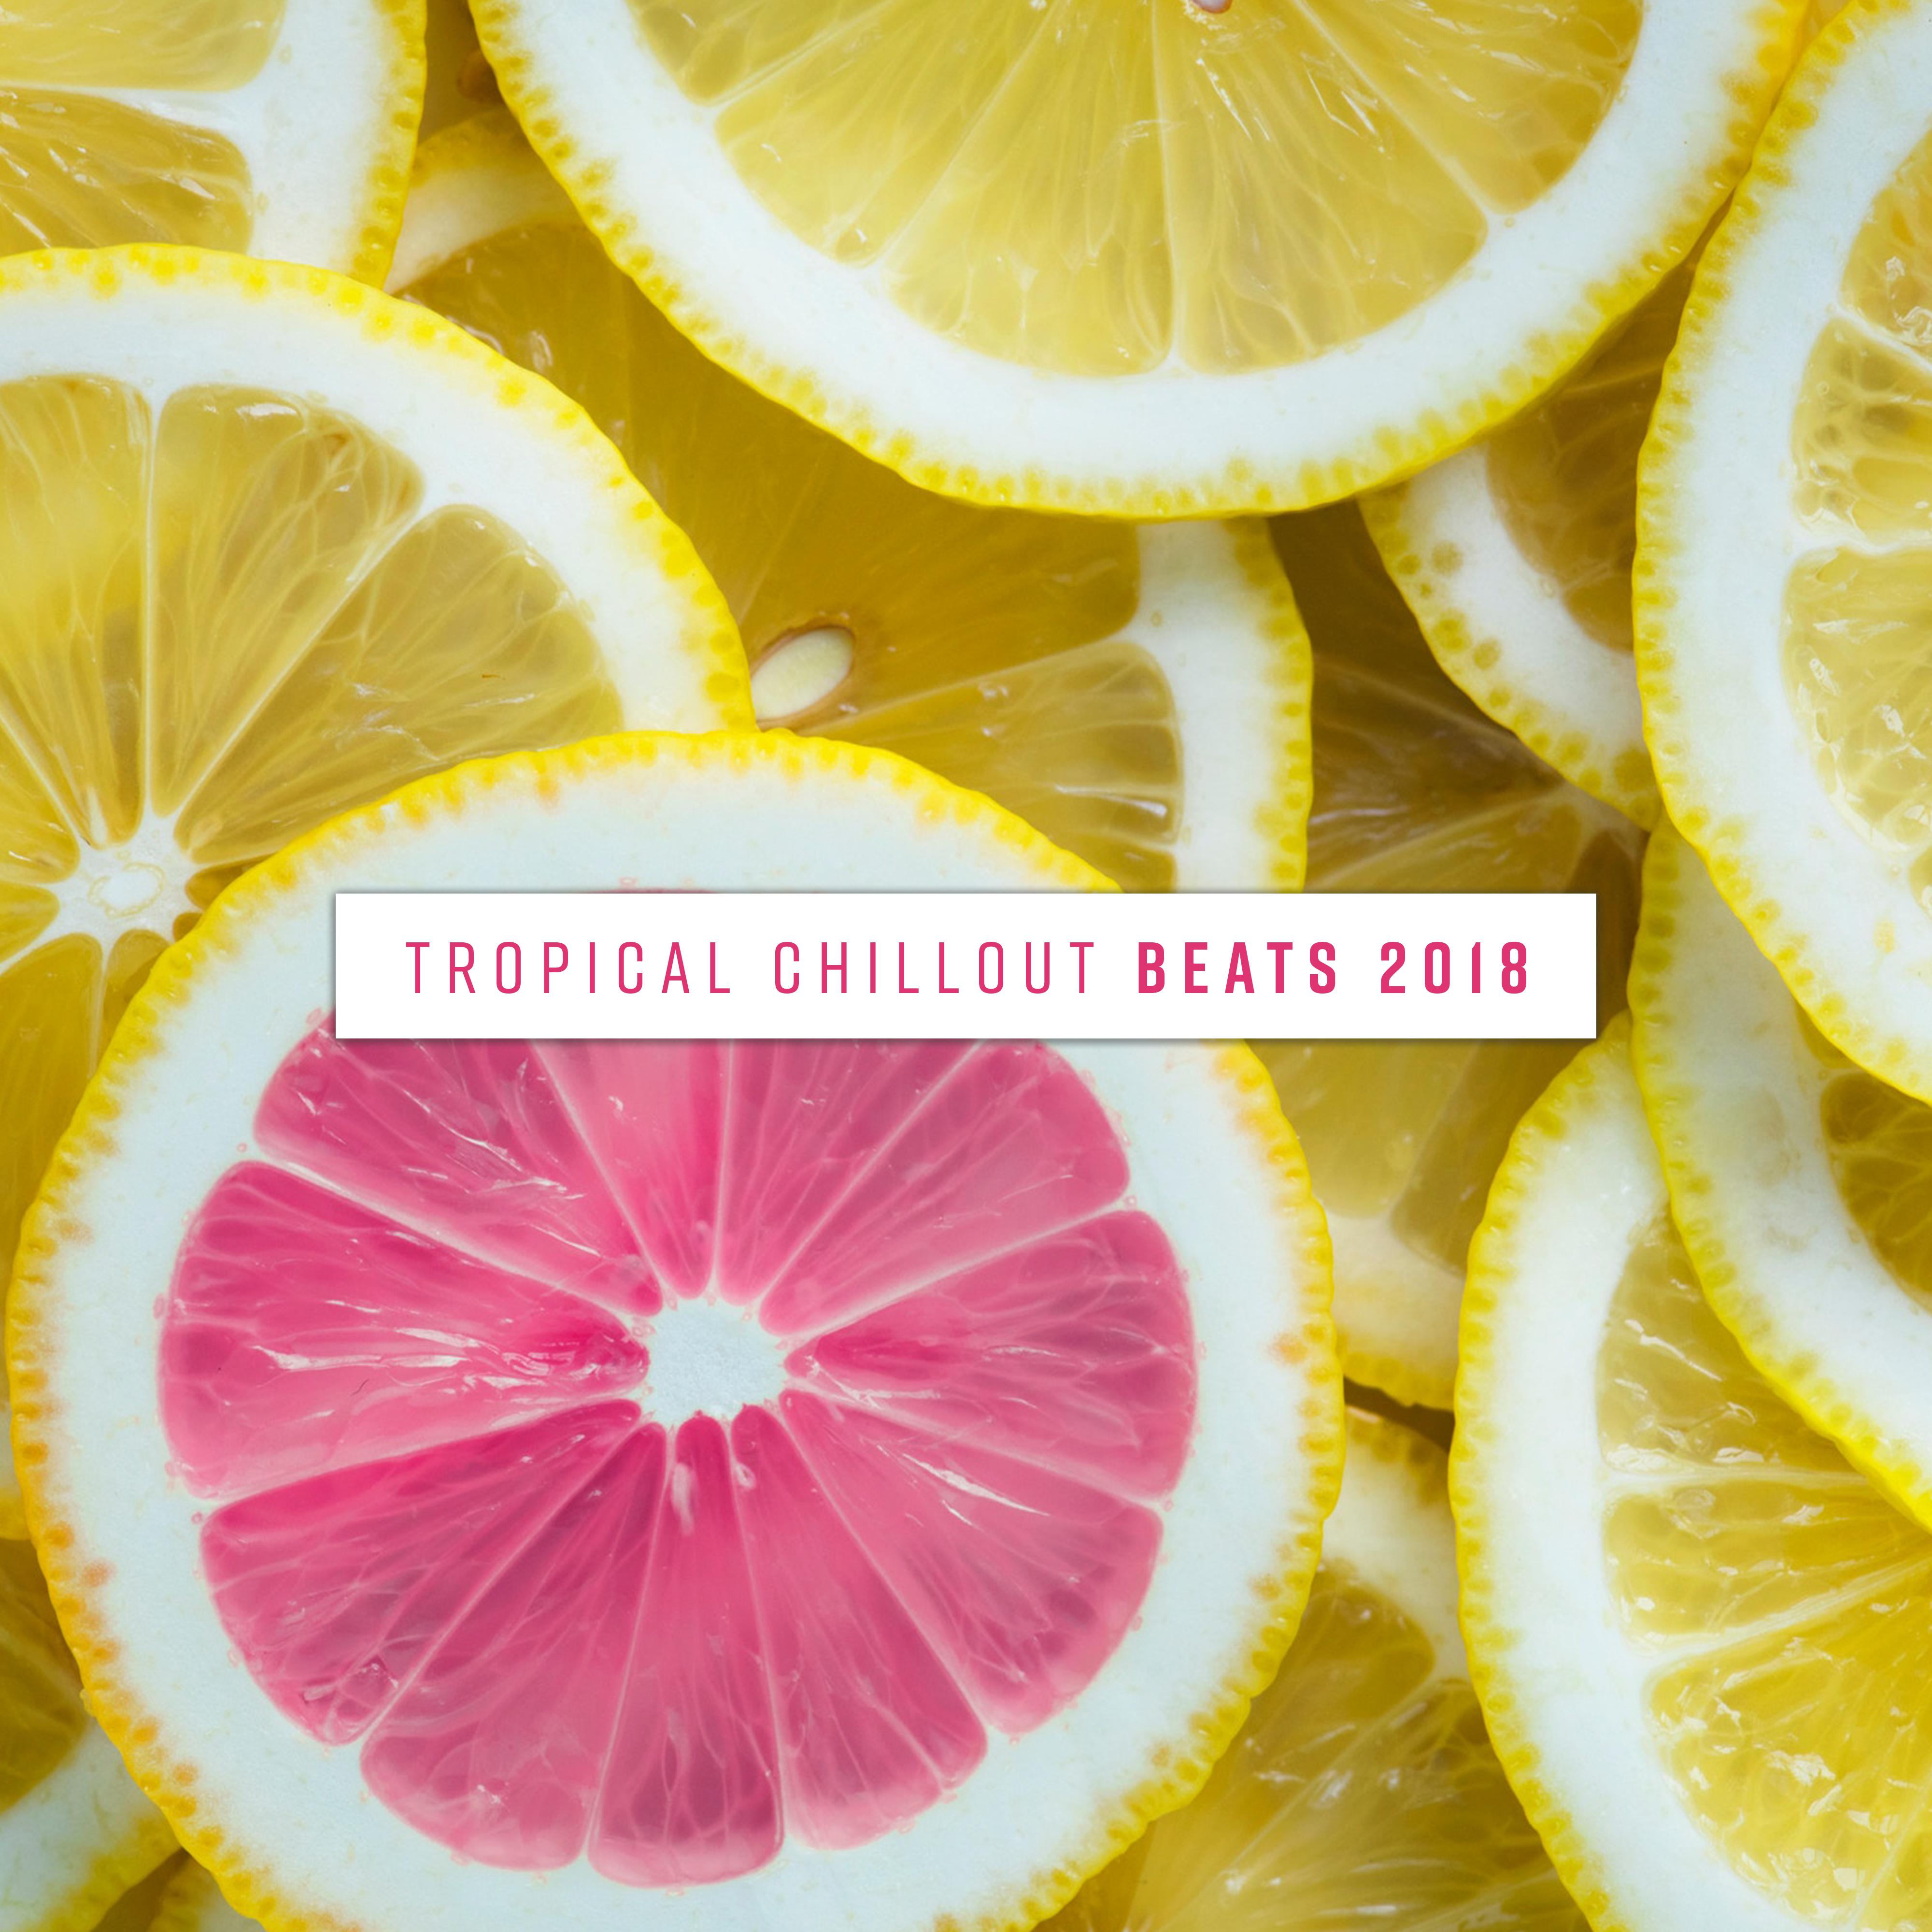 Tropical Chillout Beats 2018